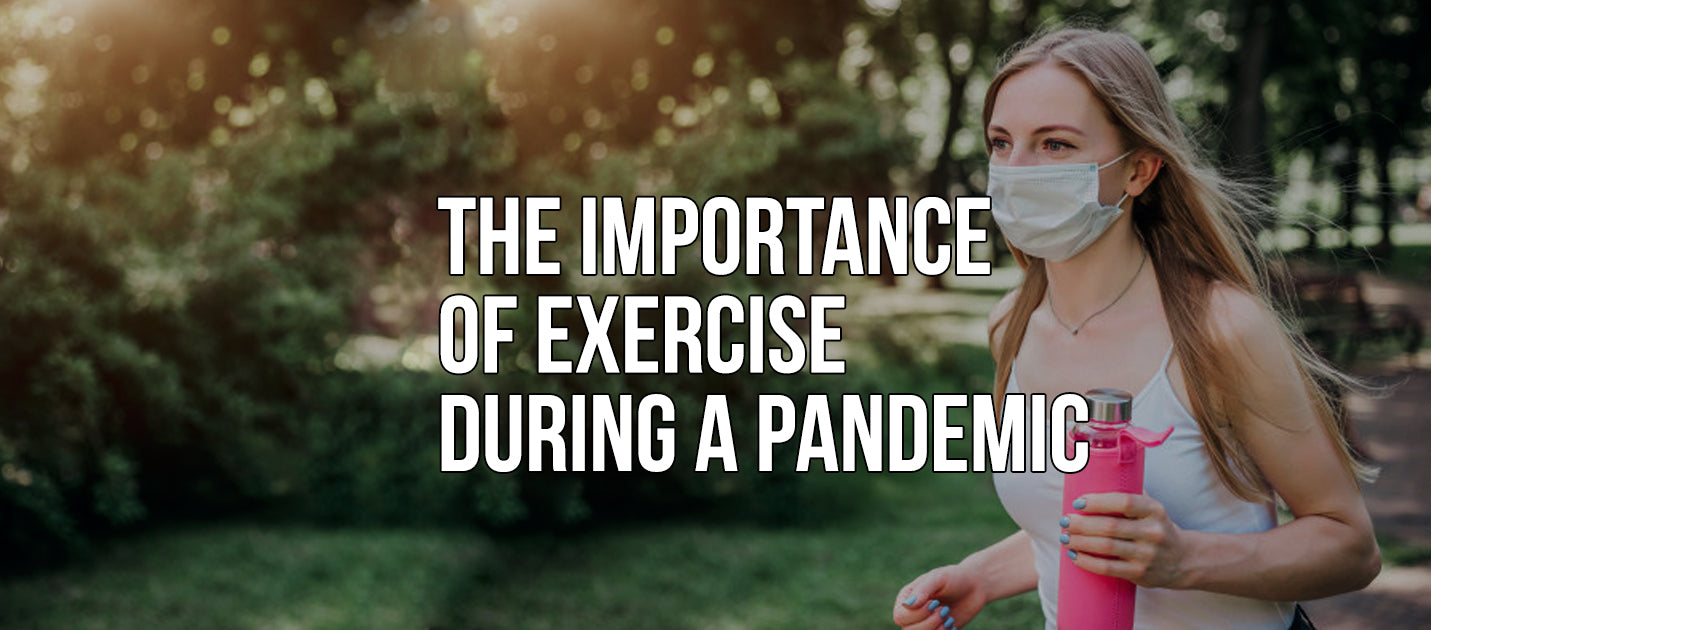 THE IMPORTANCE OF EXERCISE DURING A PANDEMIC